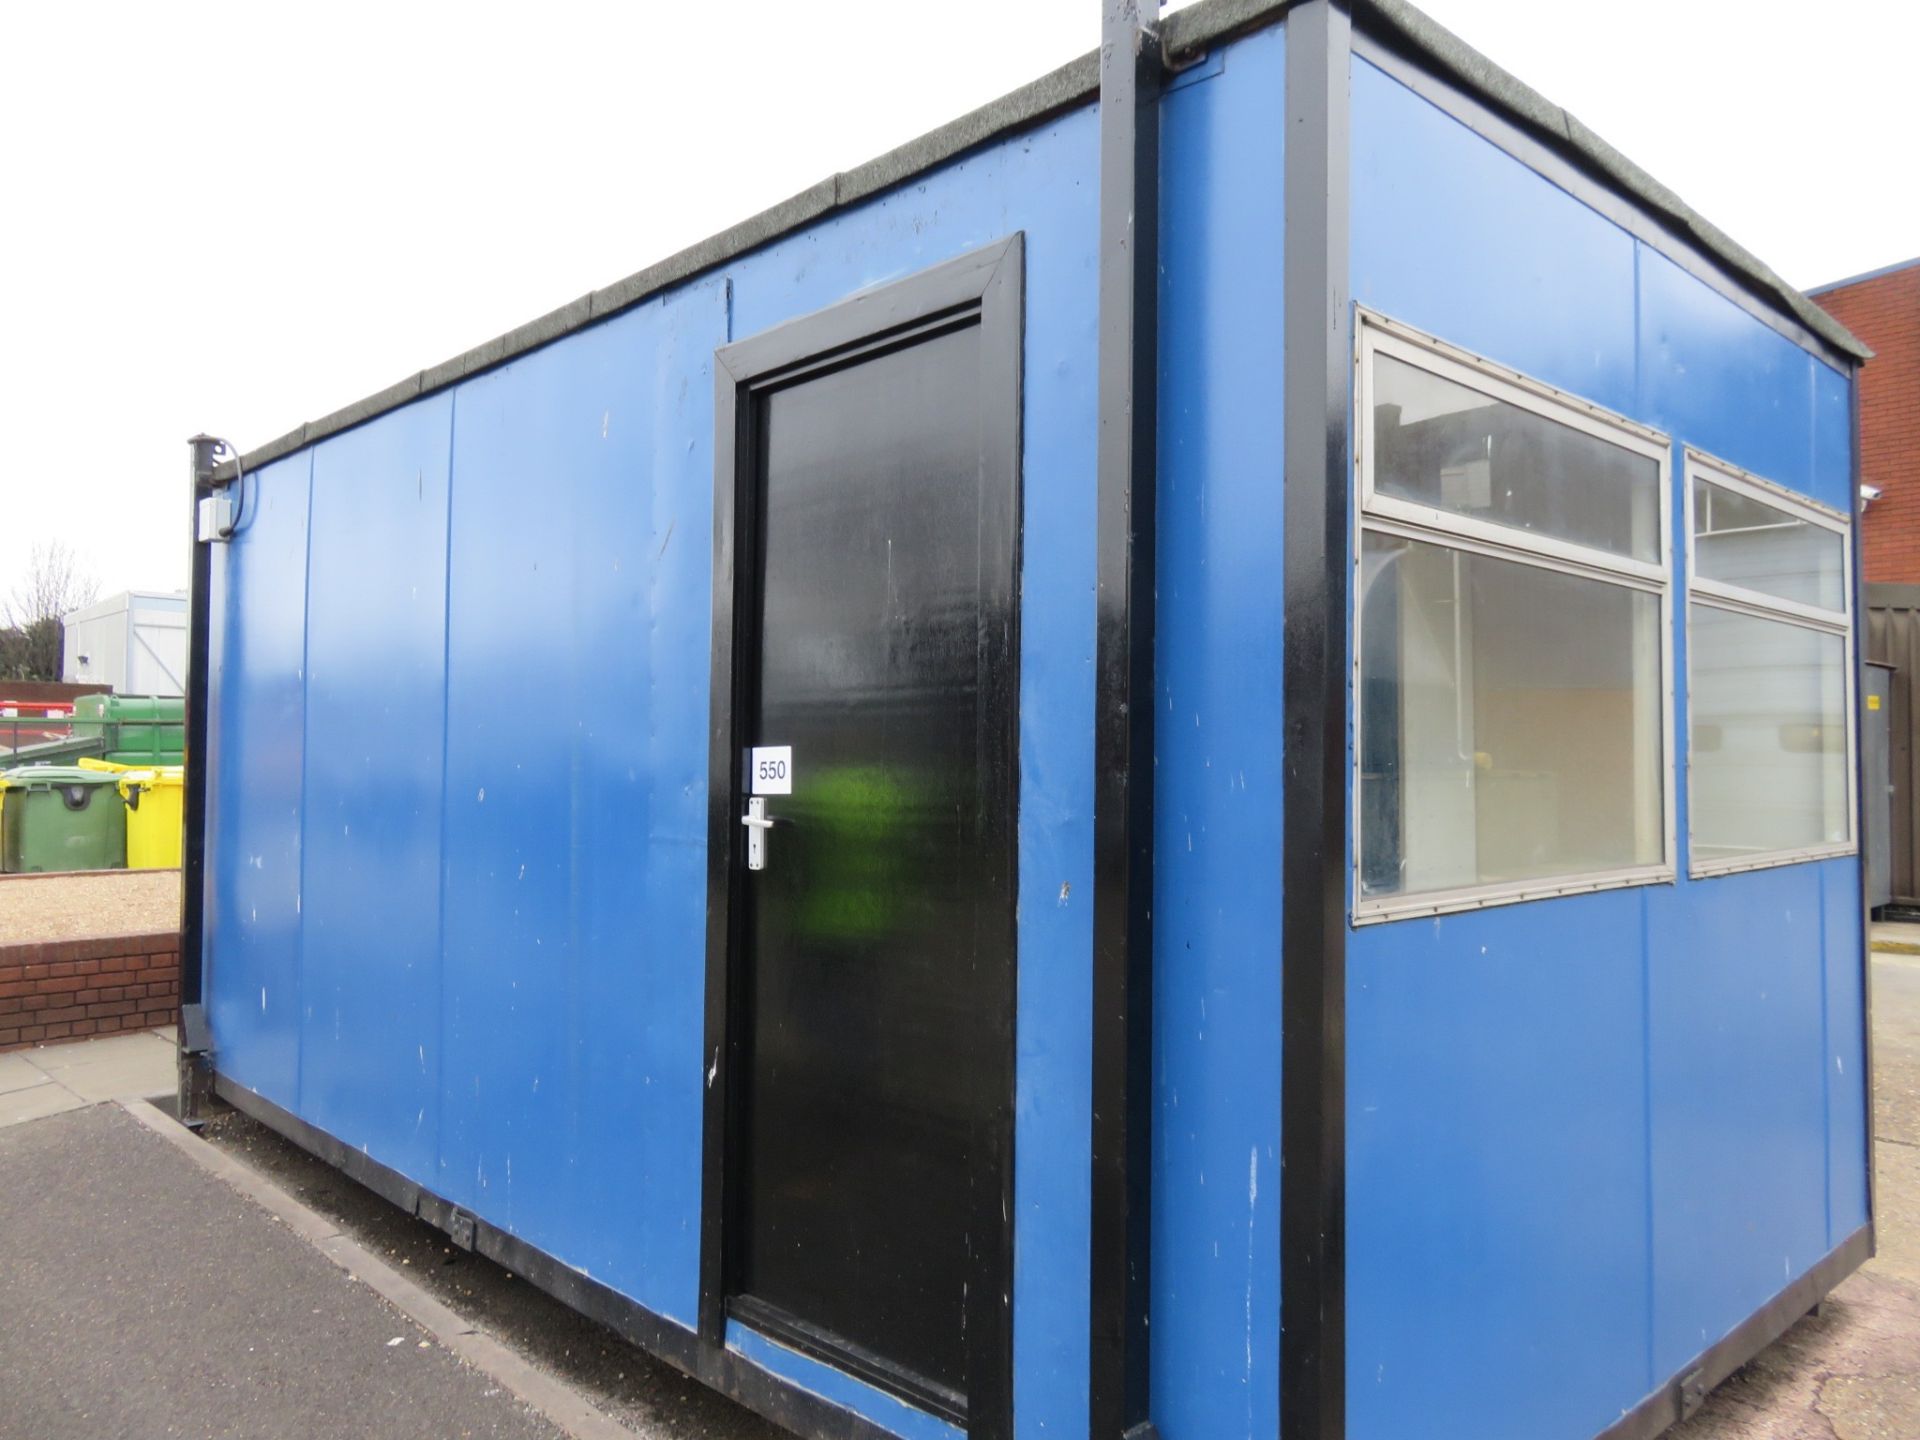 Portacabin. 2 doors, 2 windows. Approx 2800 x 6000mm. BTR Lift out charge £600